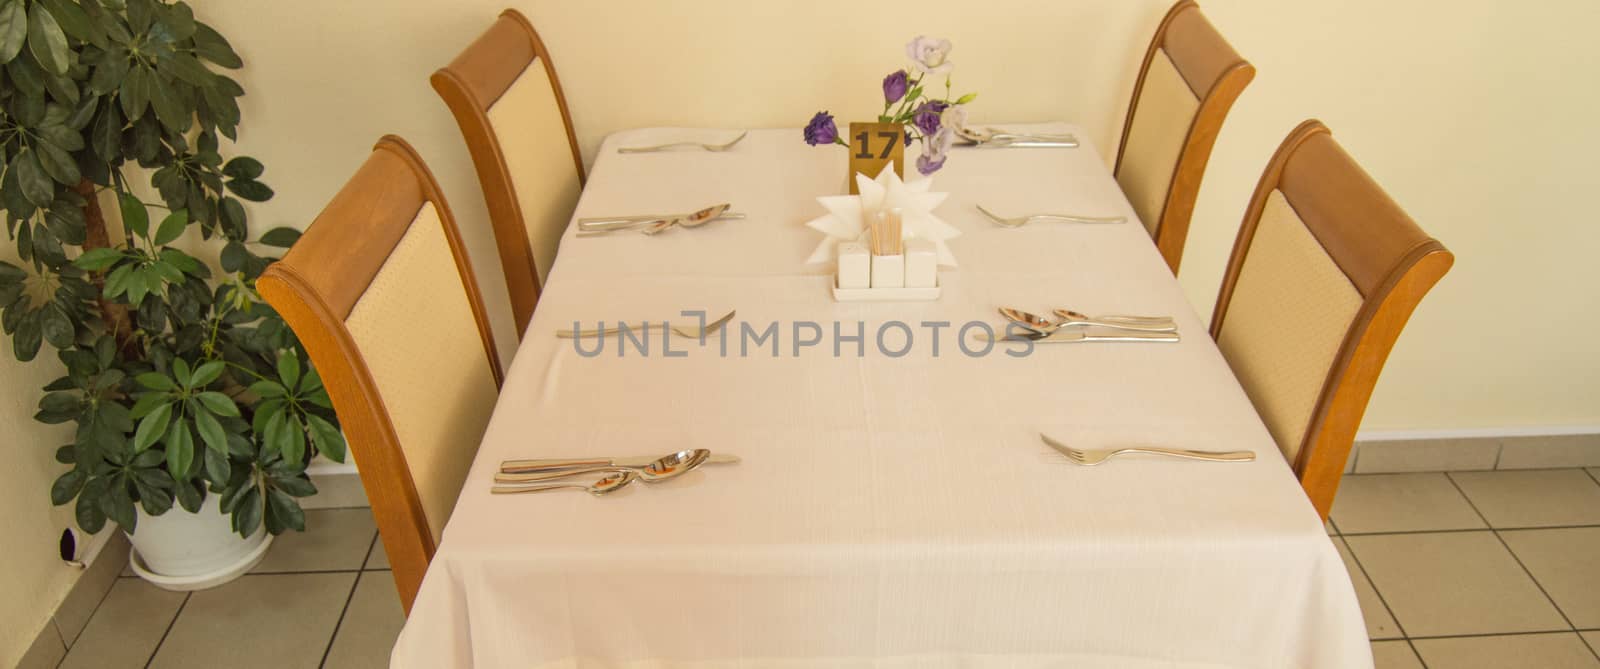 Festive table with tablecloth and Cutlery in the hotel restaurant waiting for guests, side view.